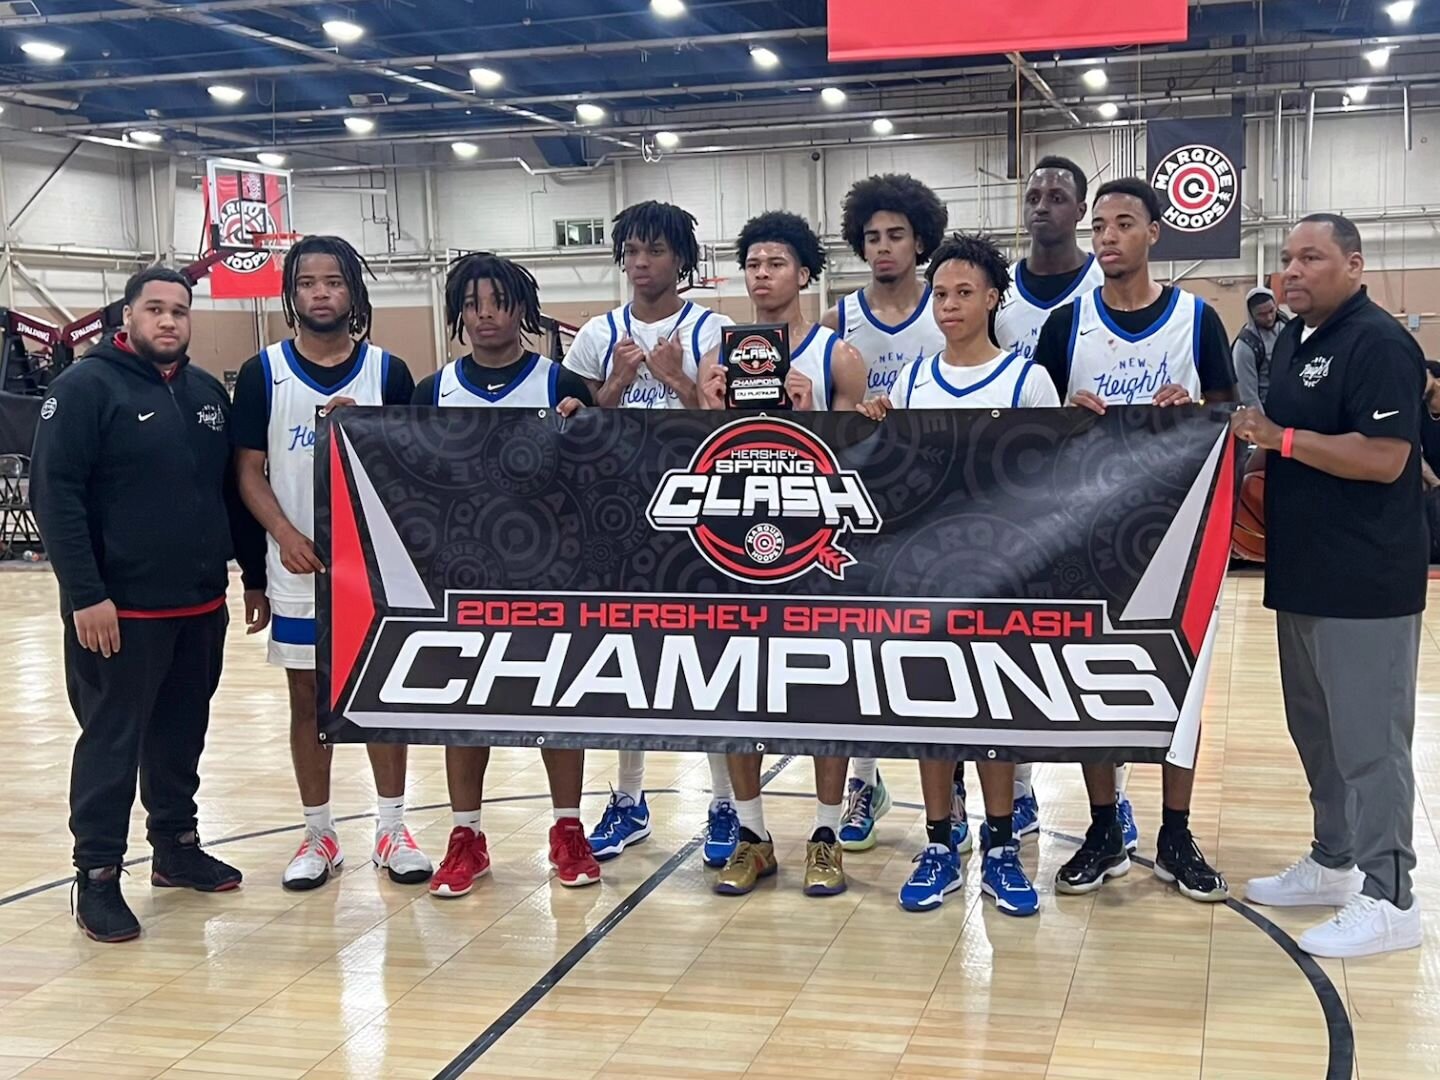 Our boys are making their moms proud this Mother's Day weekend!

Congrats to our 17U boys for taking home the chip at @marqueehoops this weekend 🙌🏽

We're proud of you boys!

#NEWHEIGHTSNYC🔵🔴⚪